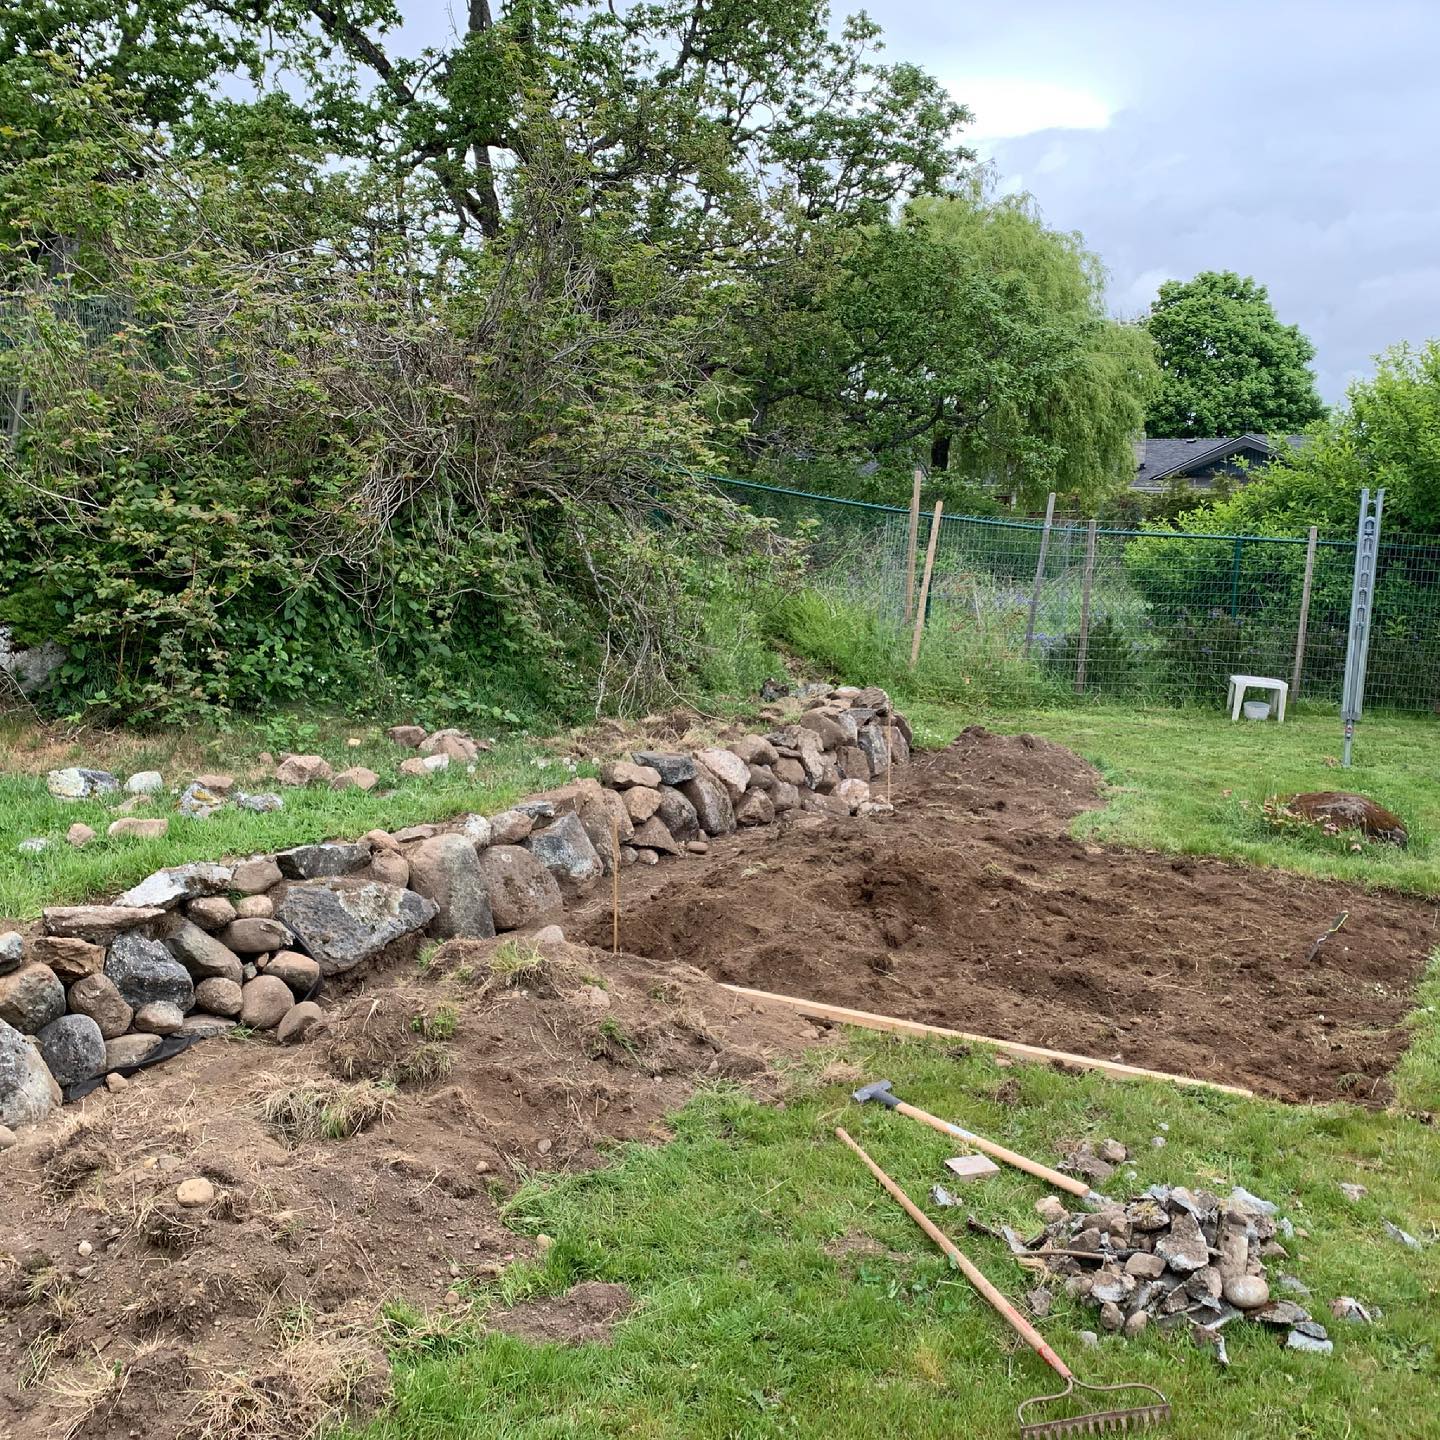 Wall completed last week. Almost have all the area cleared of grass now. Next up is levelling and ordering the wood! #backyardgarden #raisedbeds #damndeer #covidproject